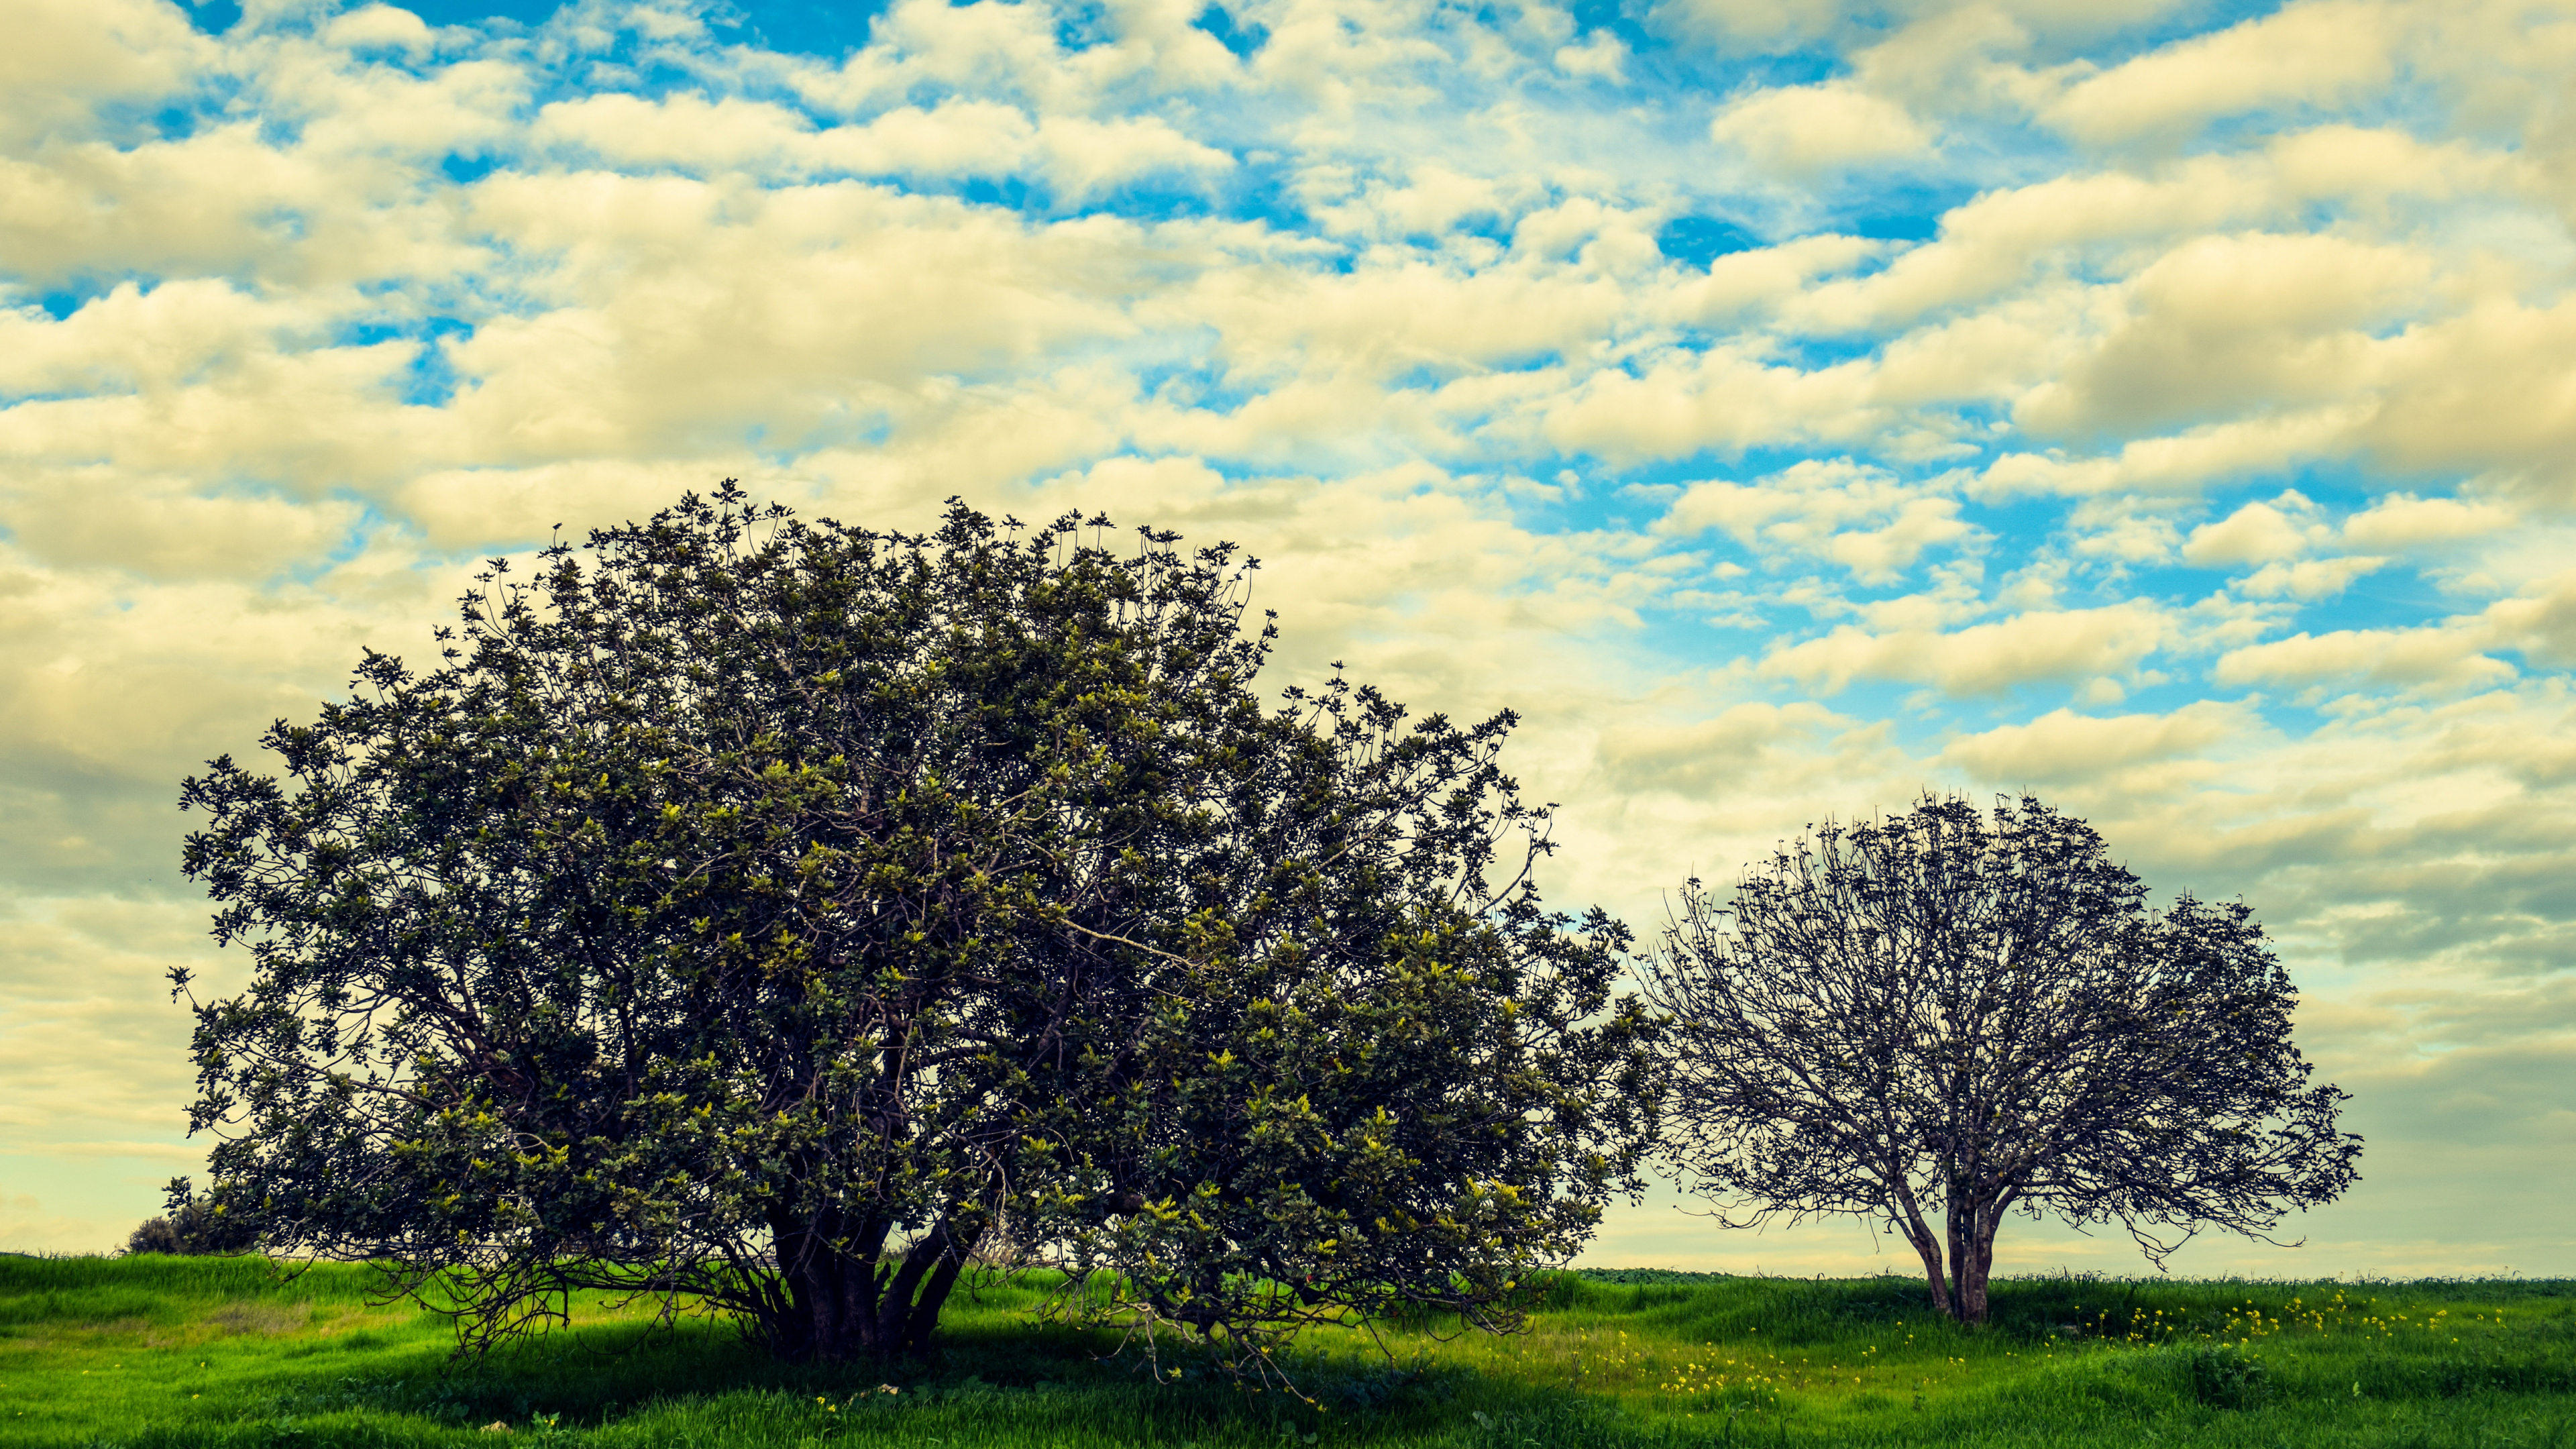 Green Tree on Green Grass Field Under Blue and White Cloudy Sky During Daytime. Wallpaper in 3840x2160 Resolution